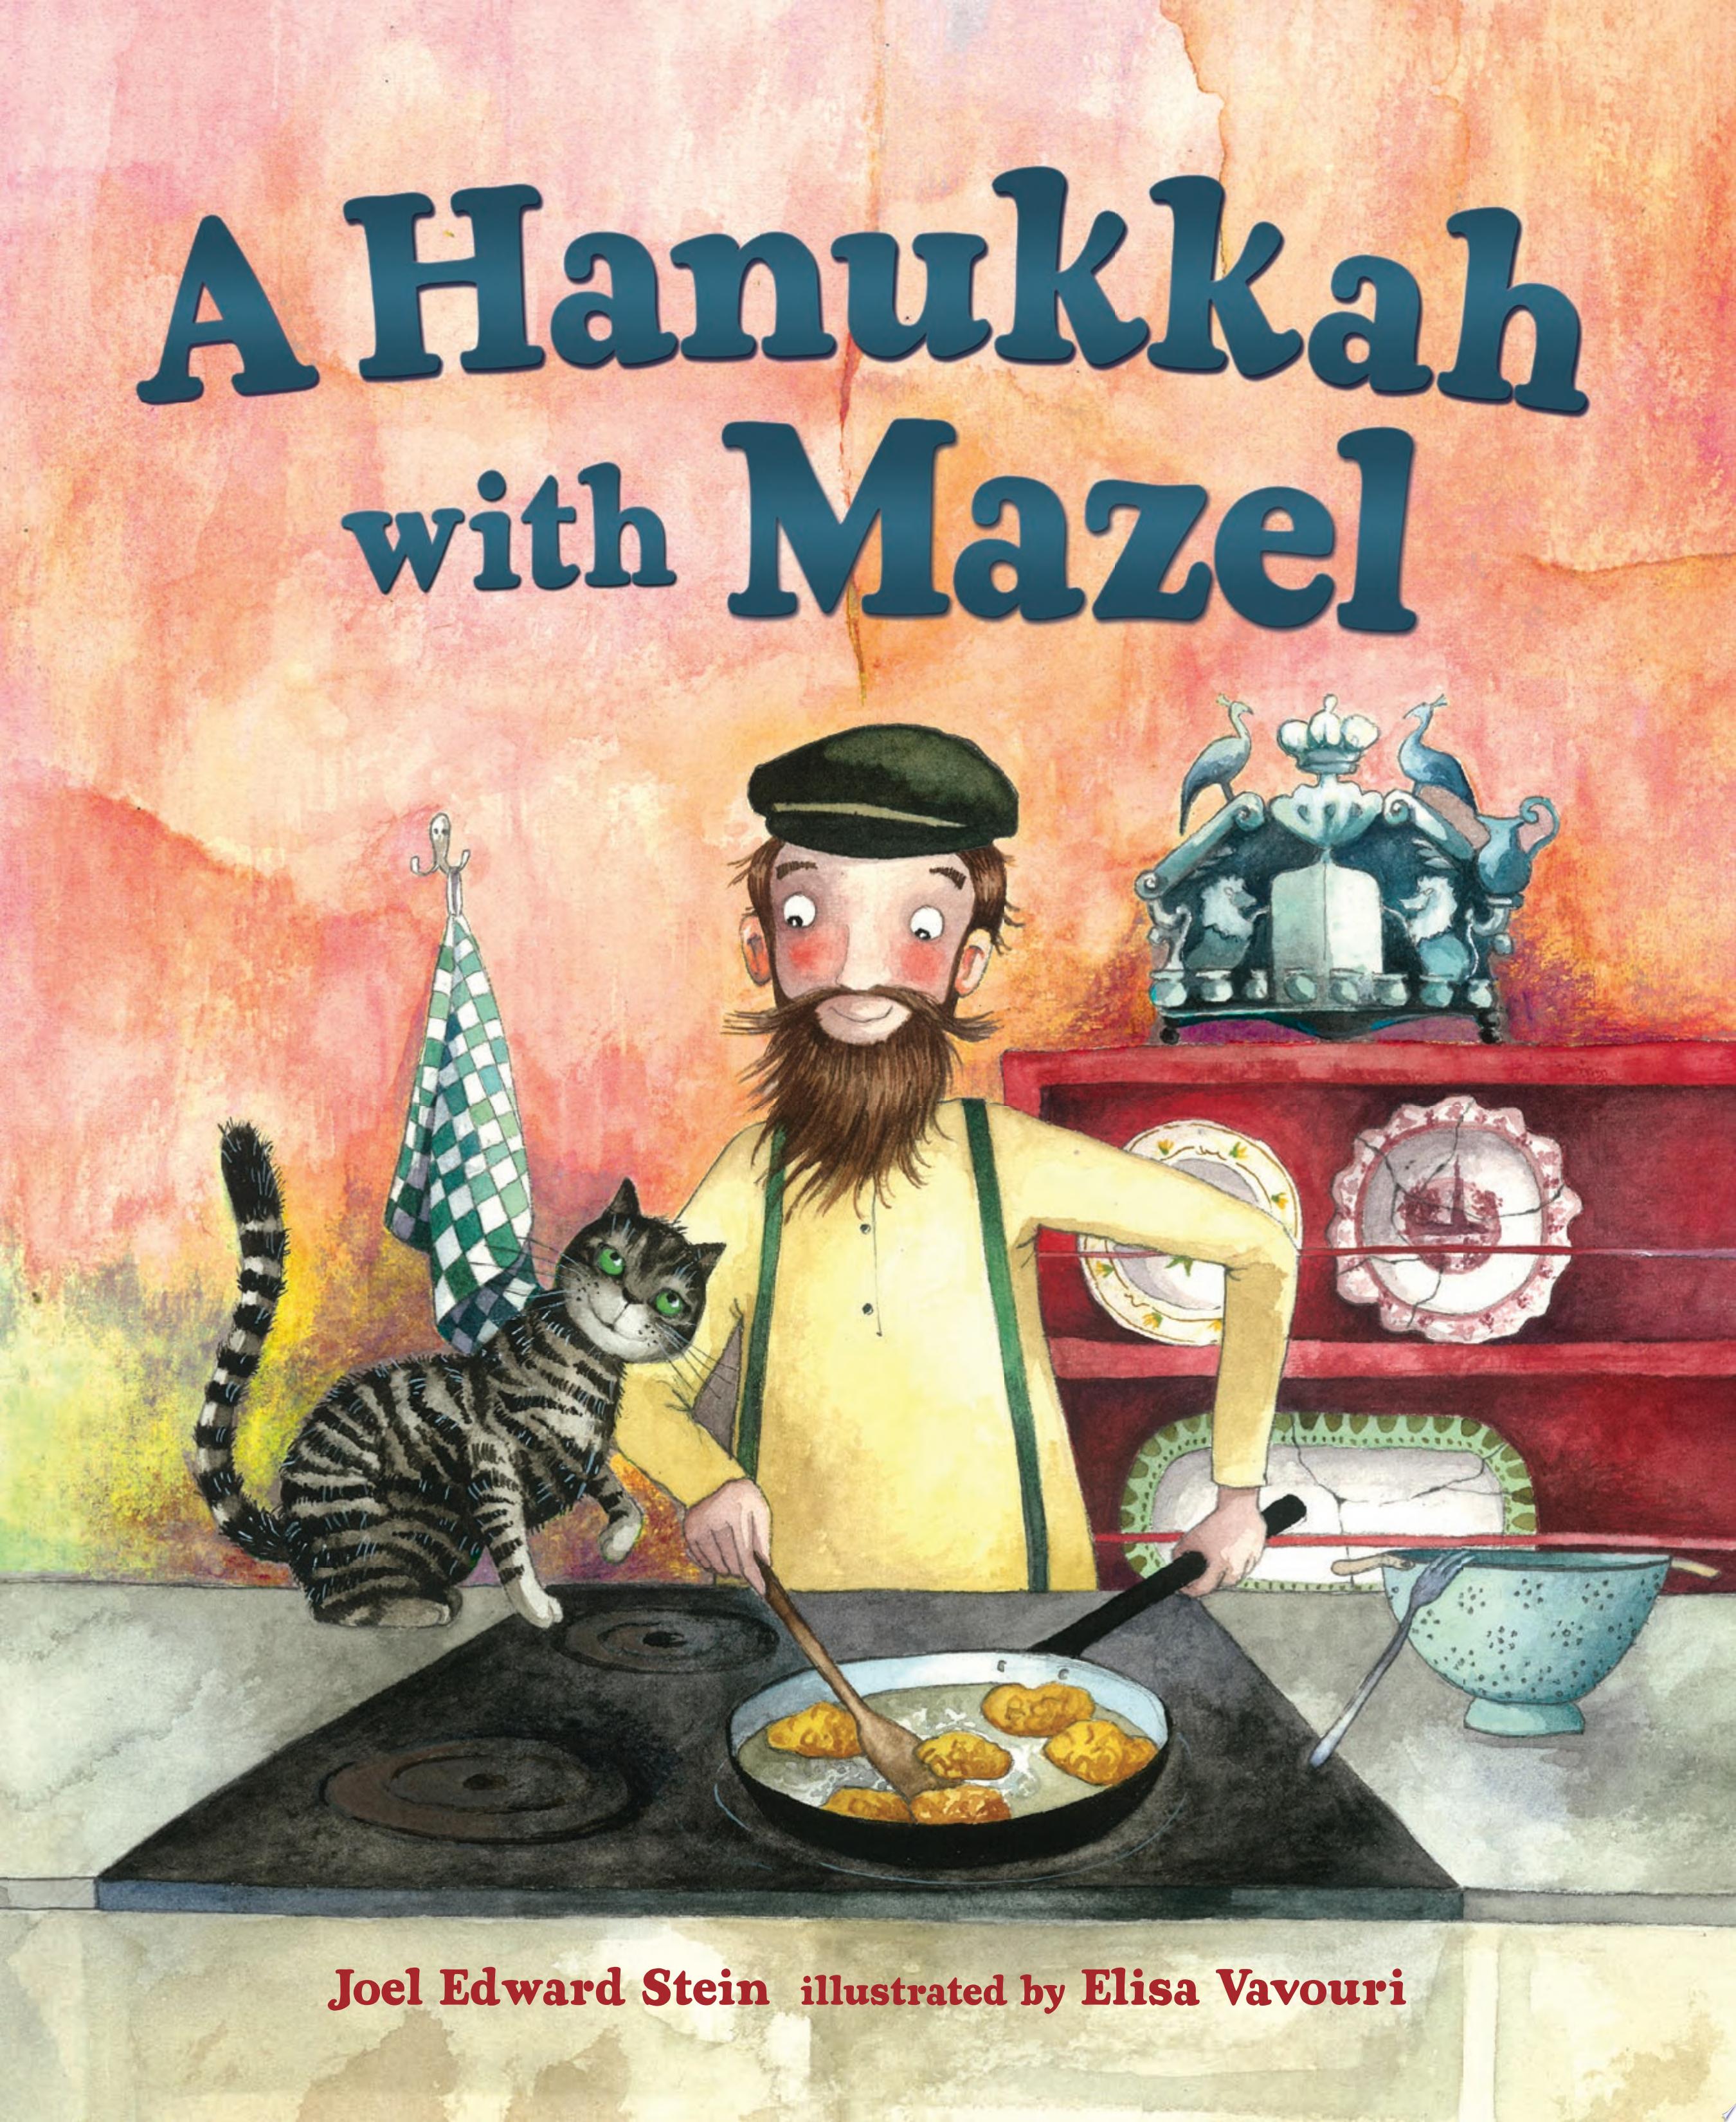 Image for "A Hanukkah with Mazel"